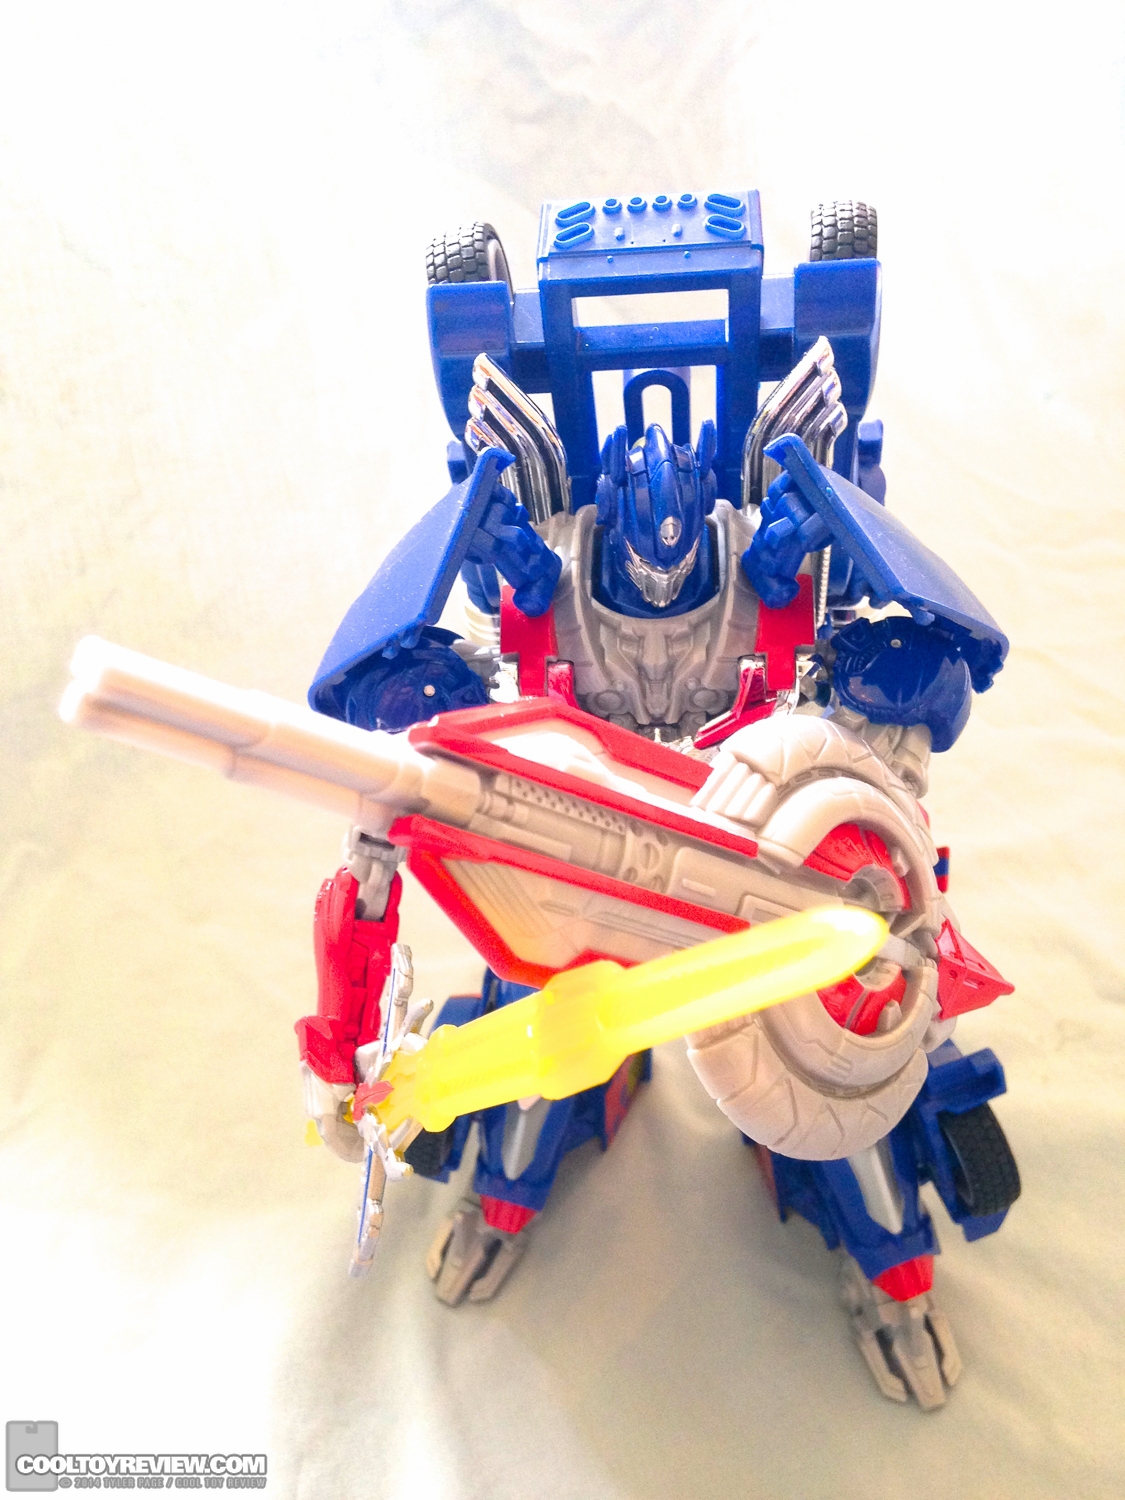 Transformers-Age-of-Extinction-Hasbro-Action-Figures-Review-021.jpg